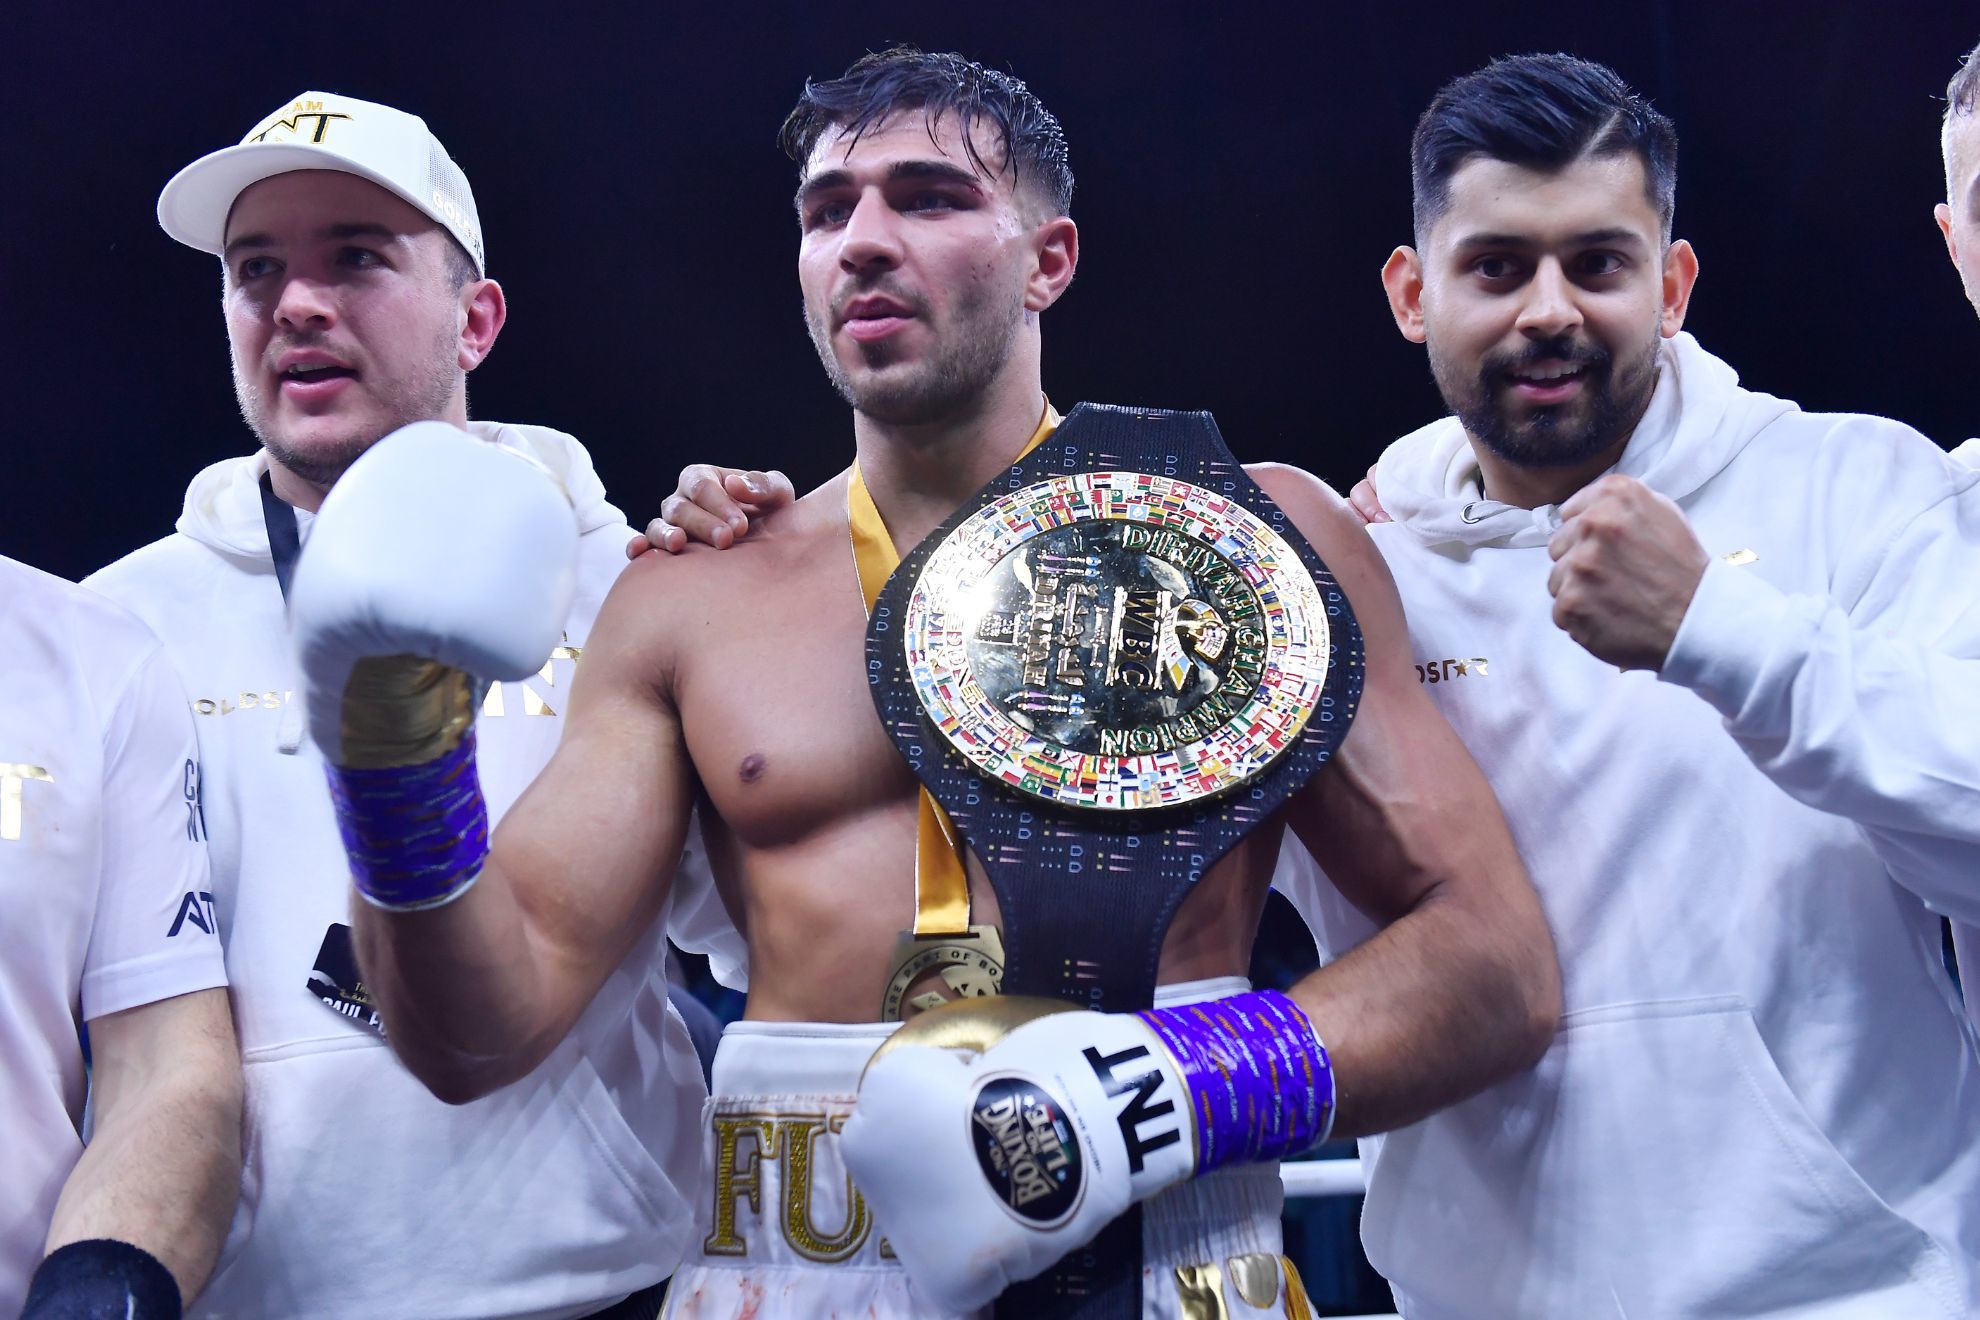 Tommy Fury turns his back on Dillon Danis and is now siding with Logan Paul